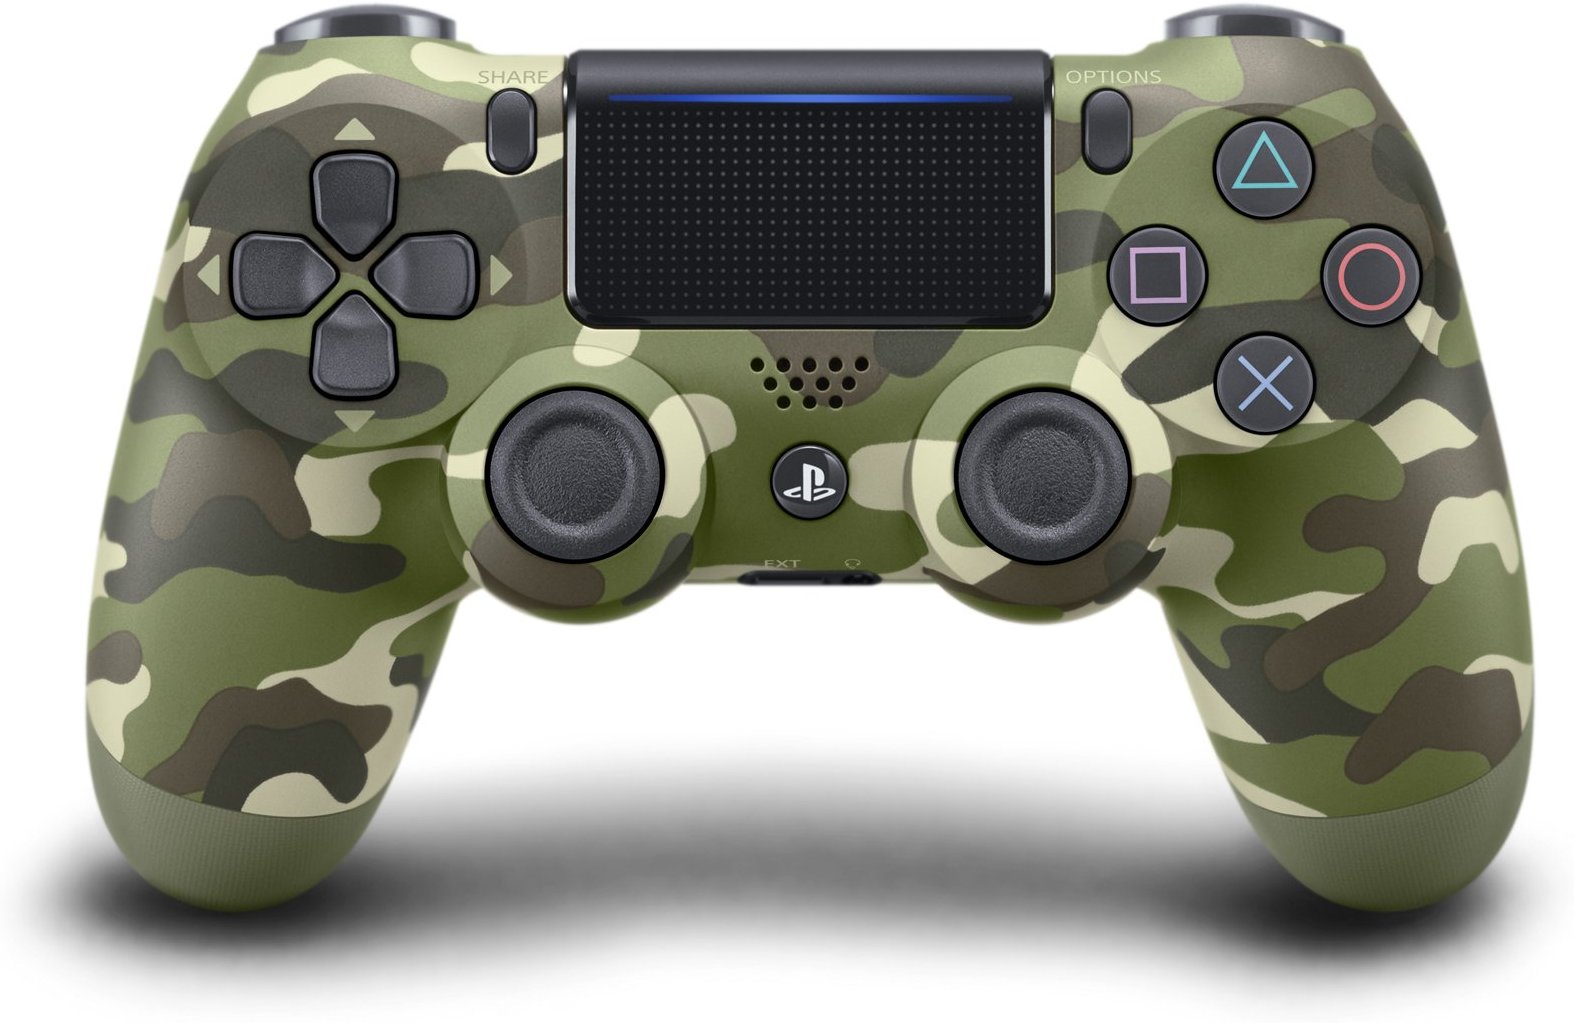 DoubleShock 4 Wireless Controller pour PlayStation 4 - Camouflag